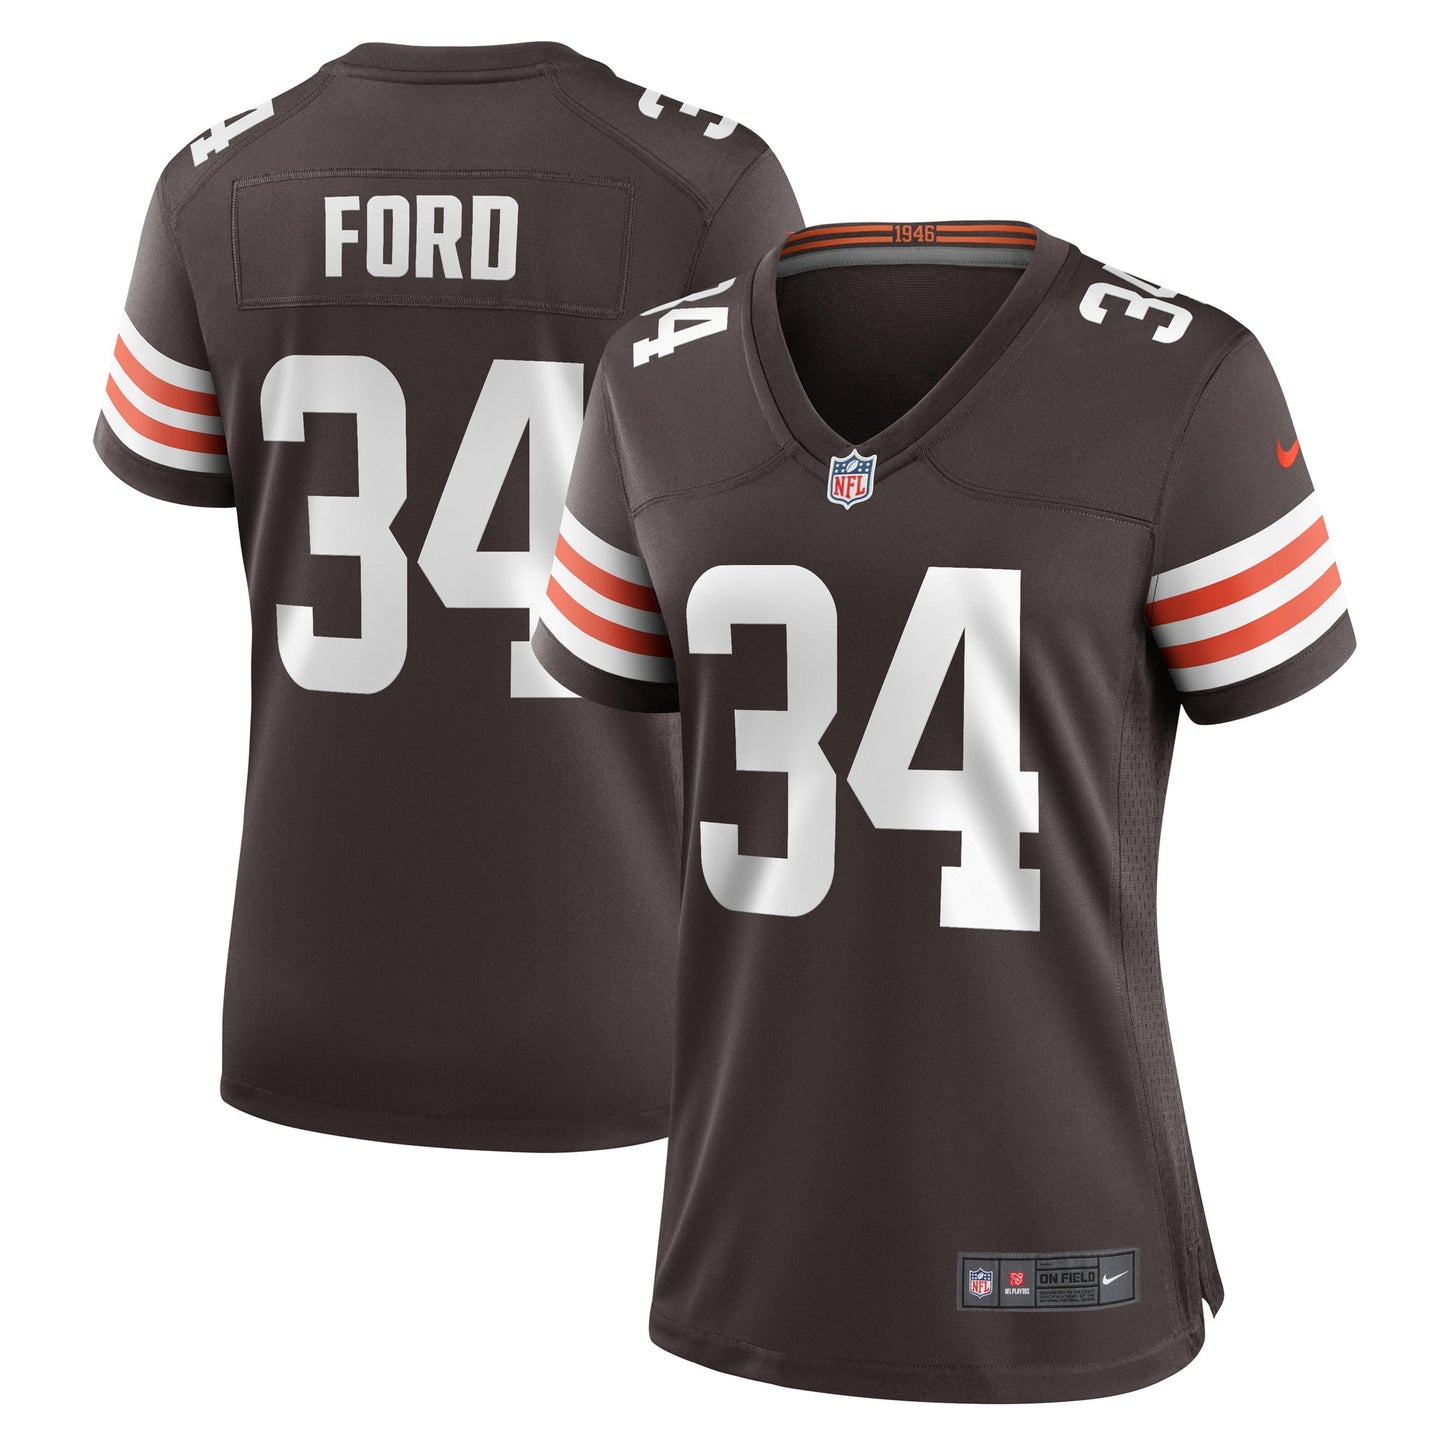 Jerome Ford Cleveland Browns Nike Women's Game Player Jersey - Brown